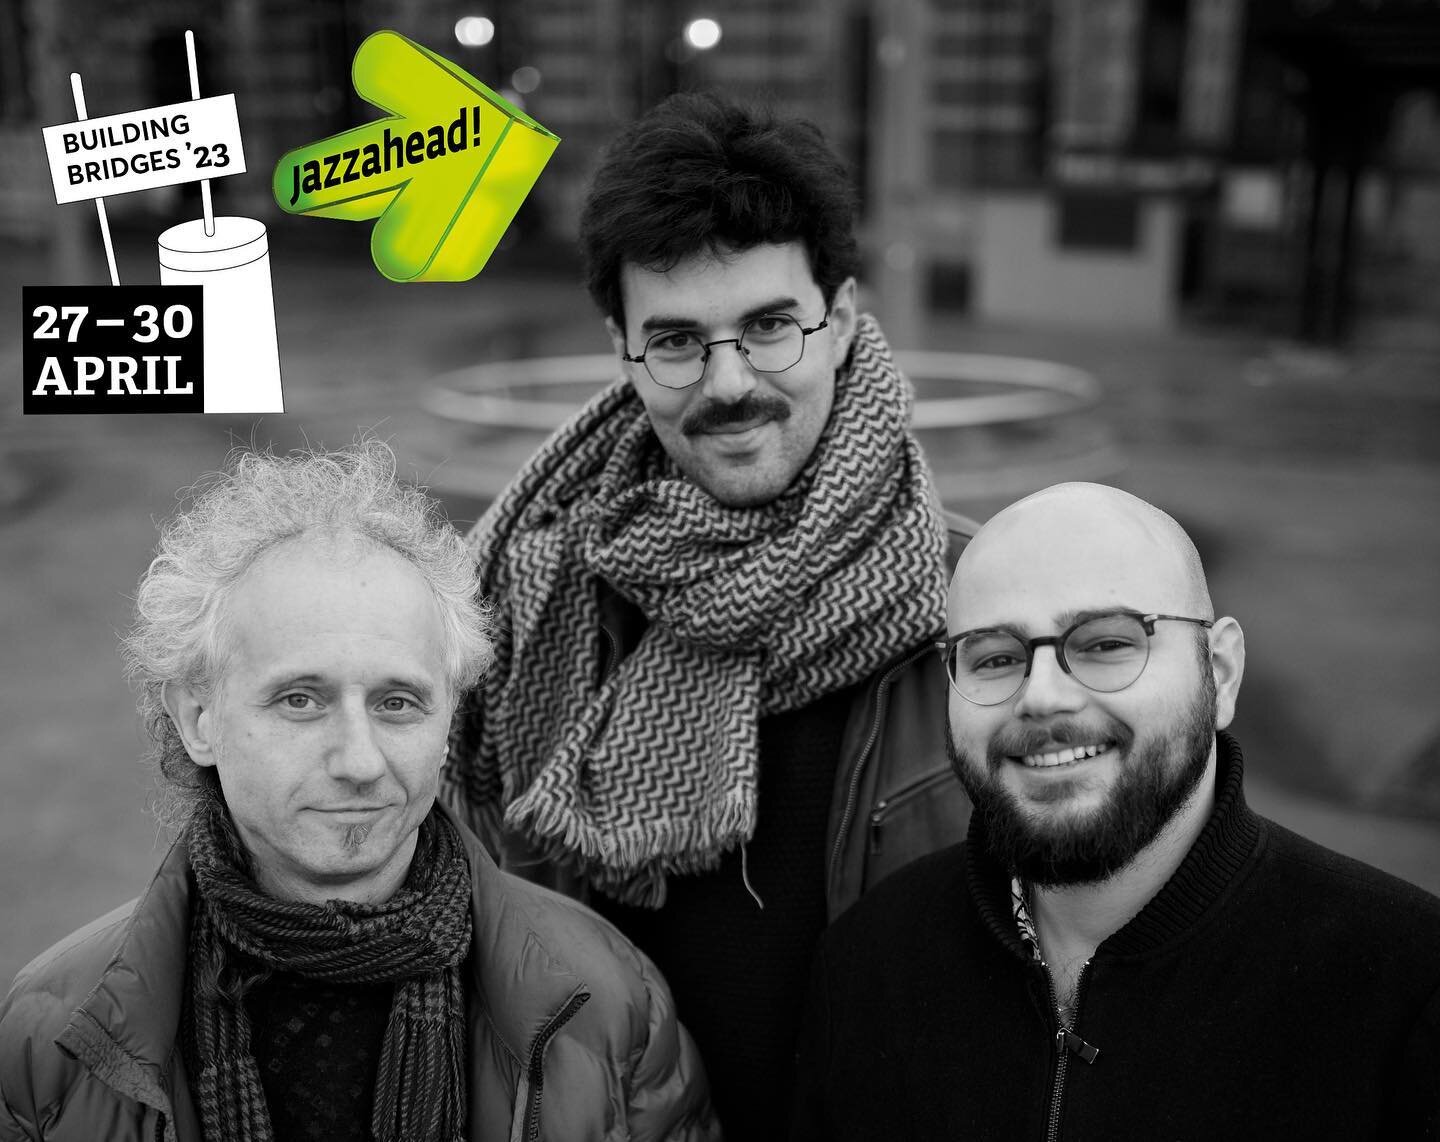 📢⚠️&gt;&gt;&gt; We are so excited to share with you that we have been selected for the @Jazzahead! 2023 showcase.
Looking forward to seeing you in Bremen in April! &lt;&lt;&lt;⚠️📢

Come celebrate with us in the next days:

12/1  AMSTERDAM  De Ruimt